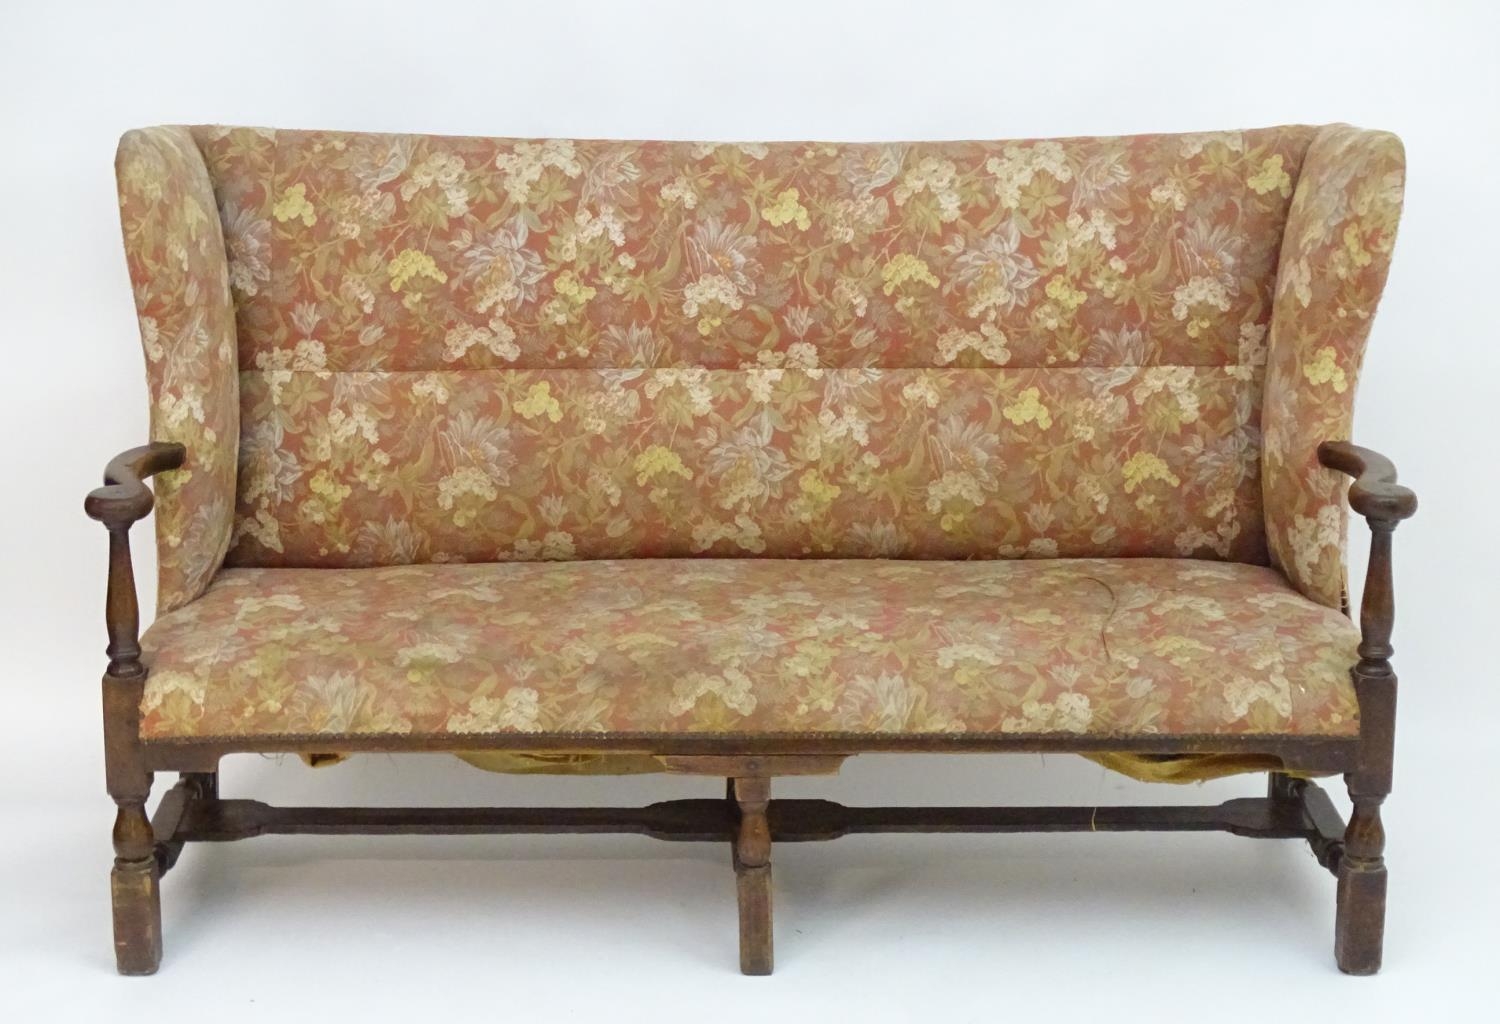 A mid 18thC wingback sofa with scrolled arms and an upholstered backrest and seat above a